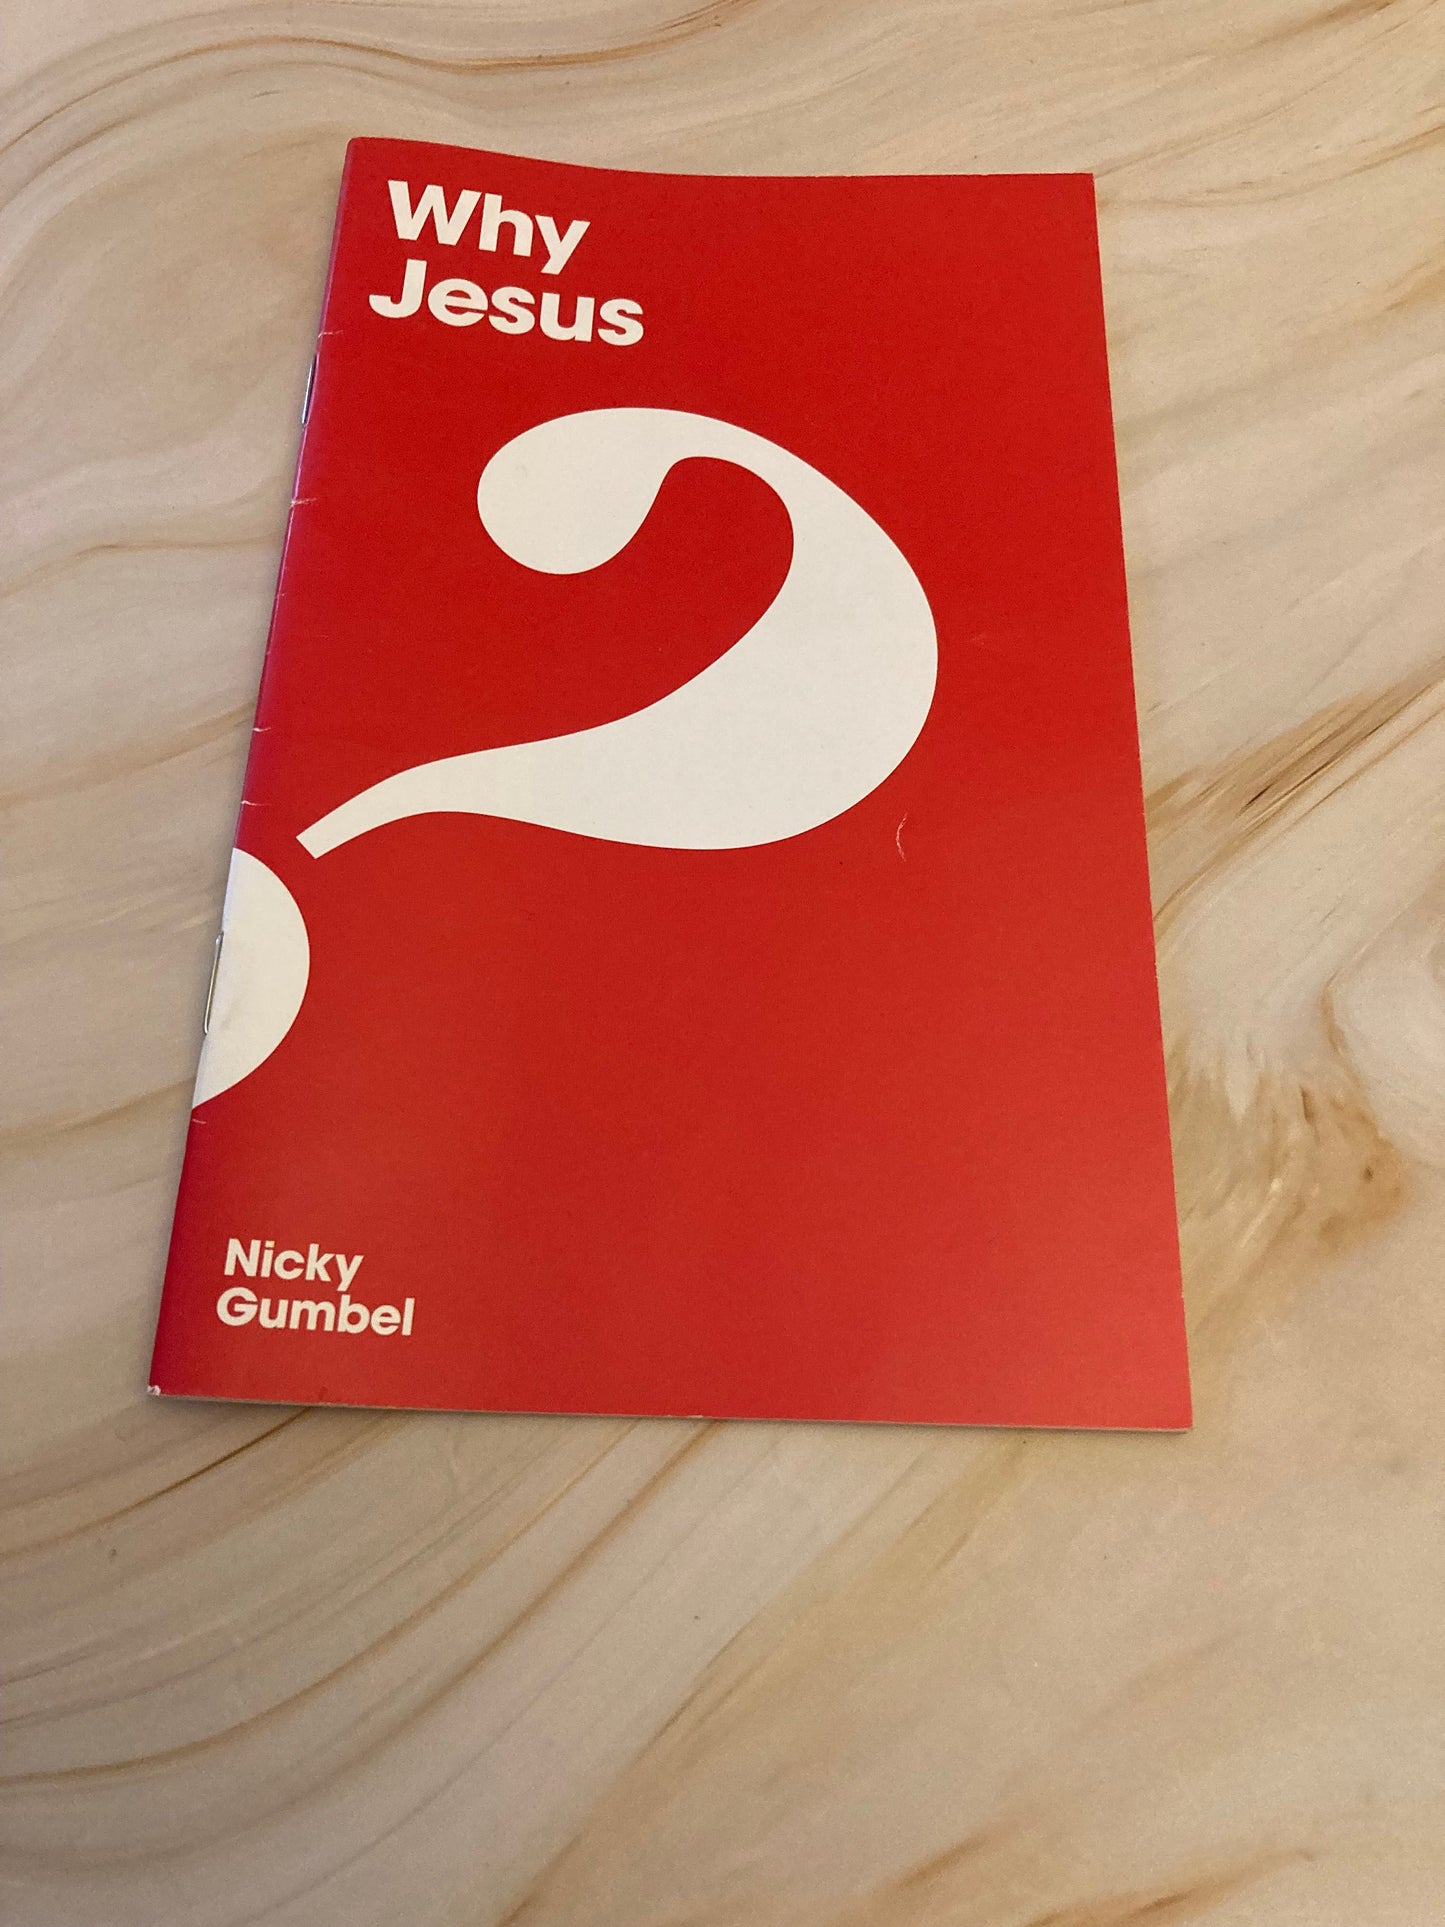 Why Jesus Booklet by Nicky Gumbel Alpha Course 2013 - (Ref X53)